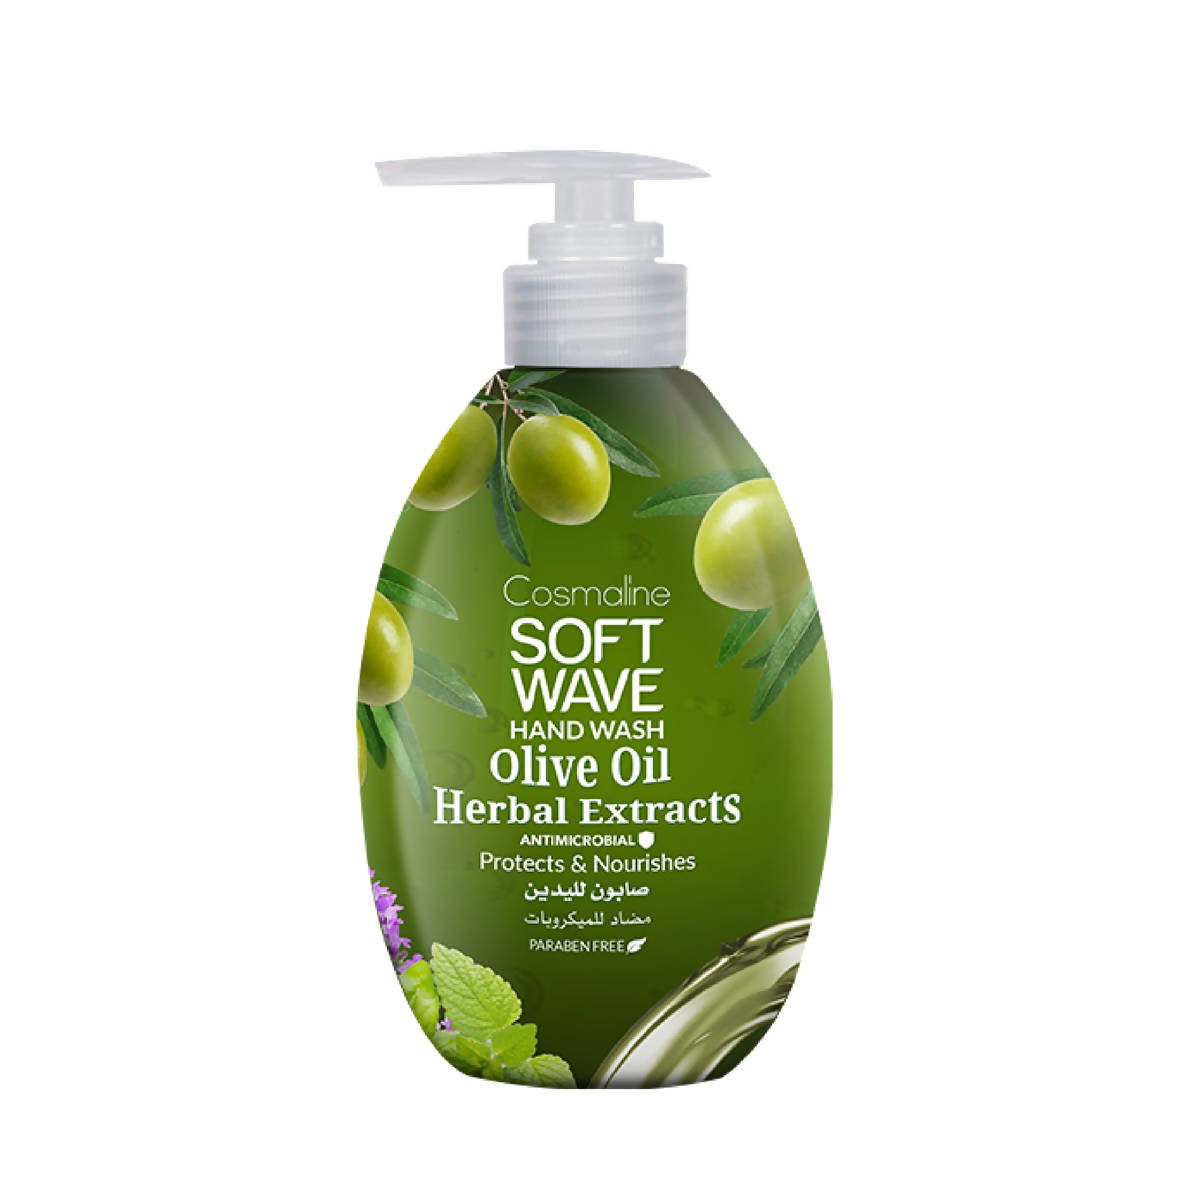 SOFTWAVE HAND WASH OLIVE OIL & 6 HERBAL EXTRACTS - 550ml